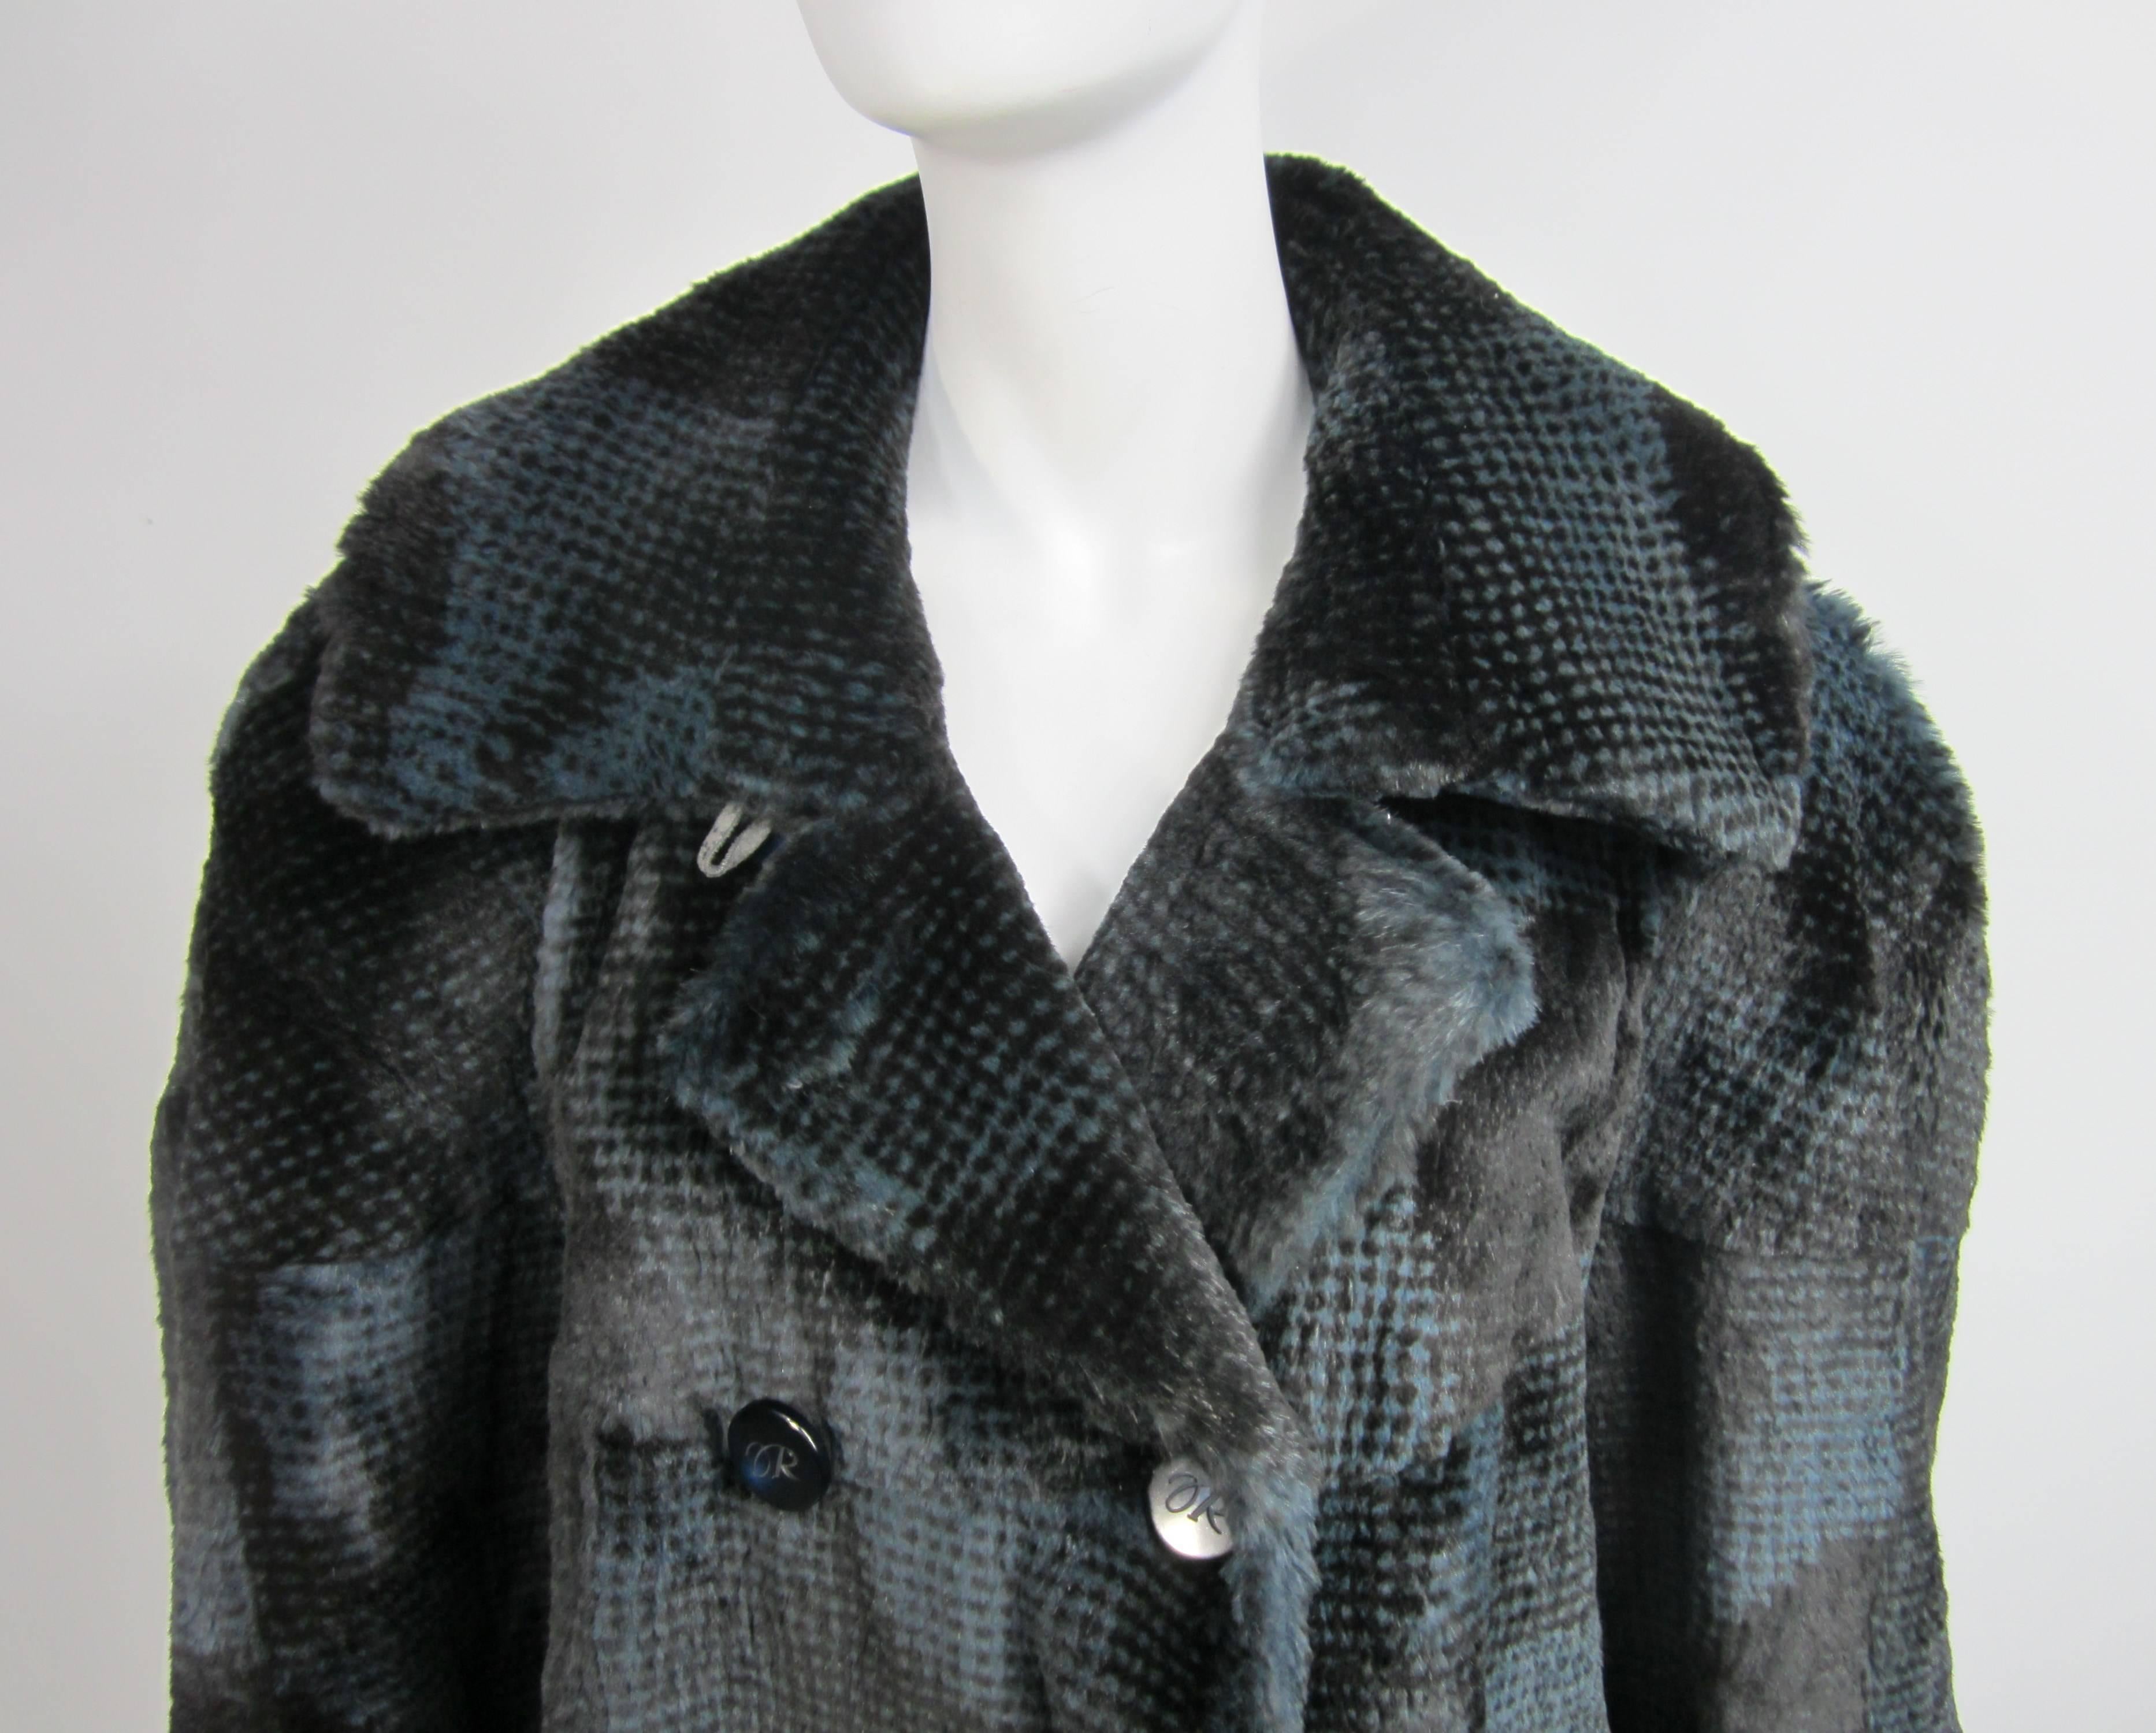 Stunning Blueish, Black and Gray Sheared Mink By Revillon of Paris. Fur is soft and supple. This coat is a pea coat style. The coats changes color in the light, see photos. Have Large  R's on Buttons and inside on the lining. Over sized large